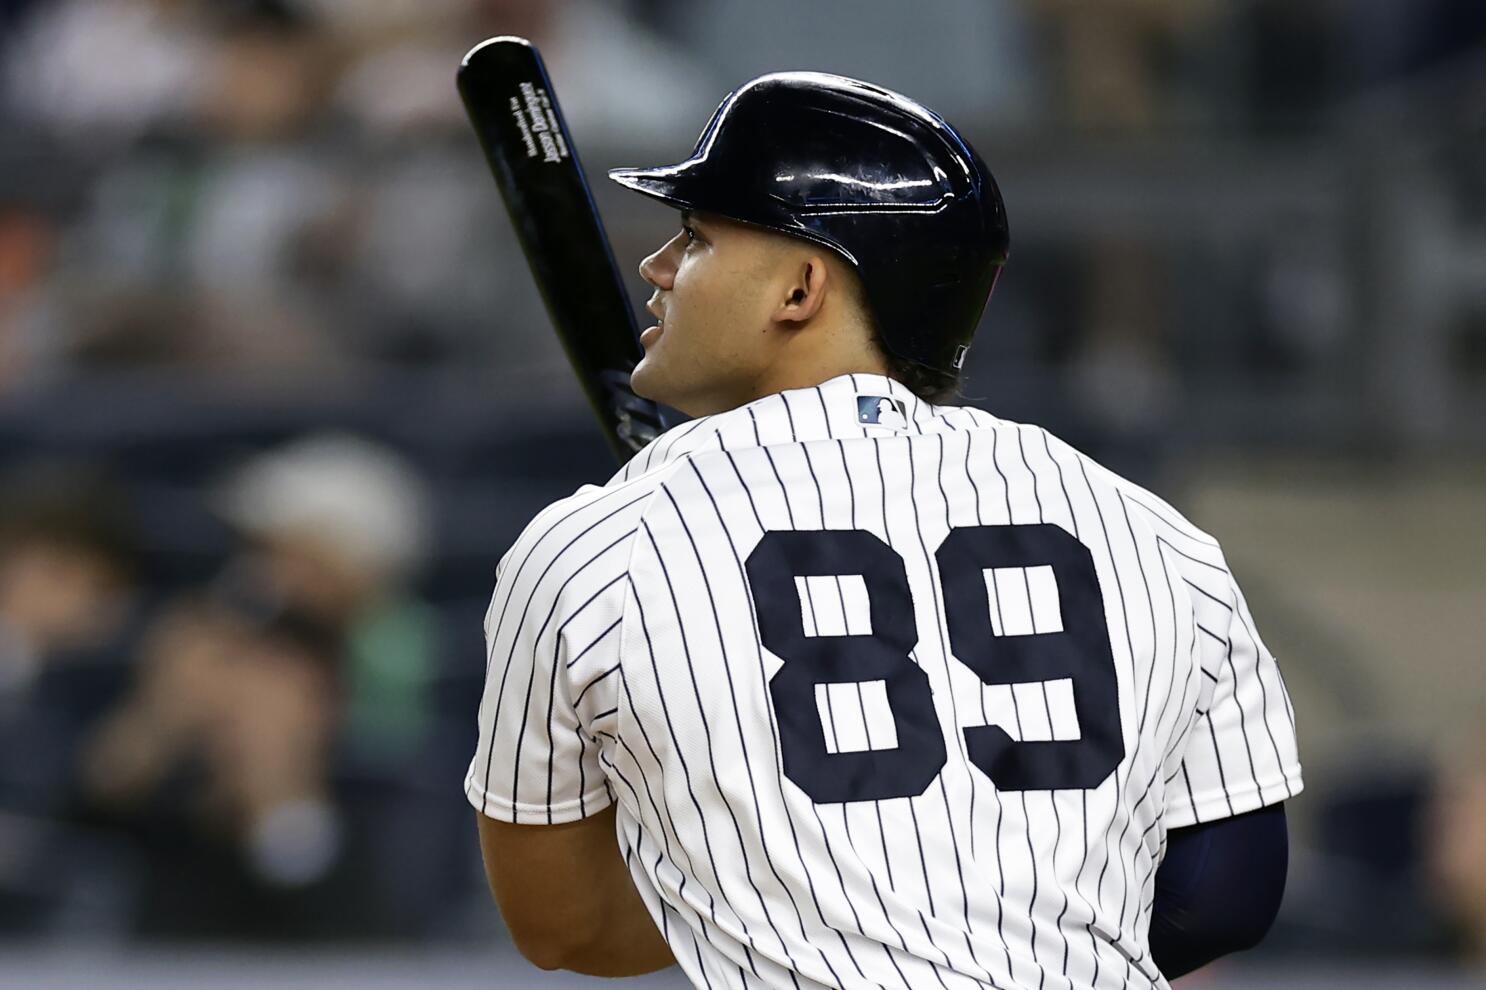 Yankees rookie outfielder Jasson Domínguez has torn elbow ligament